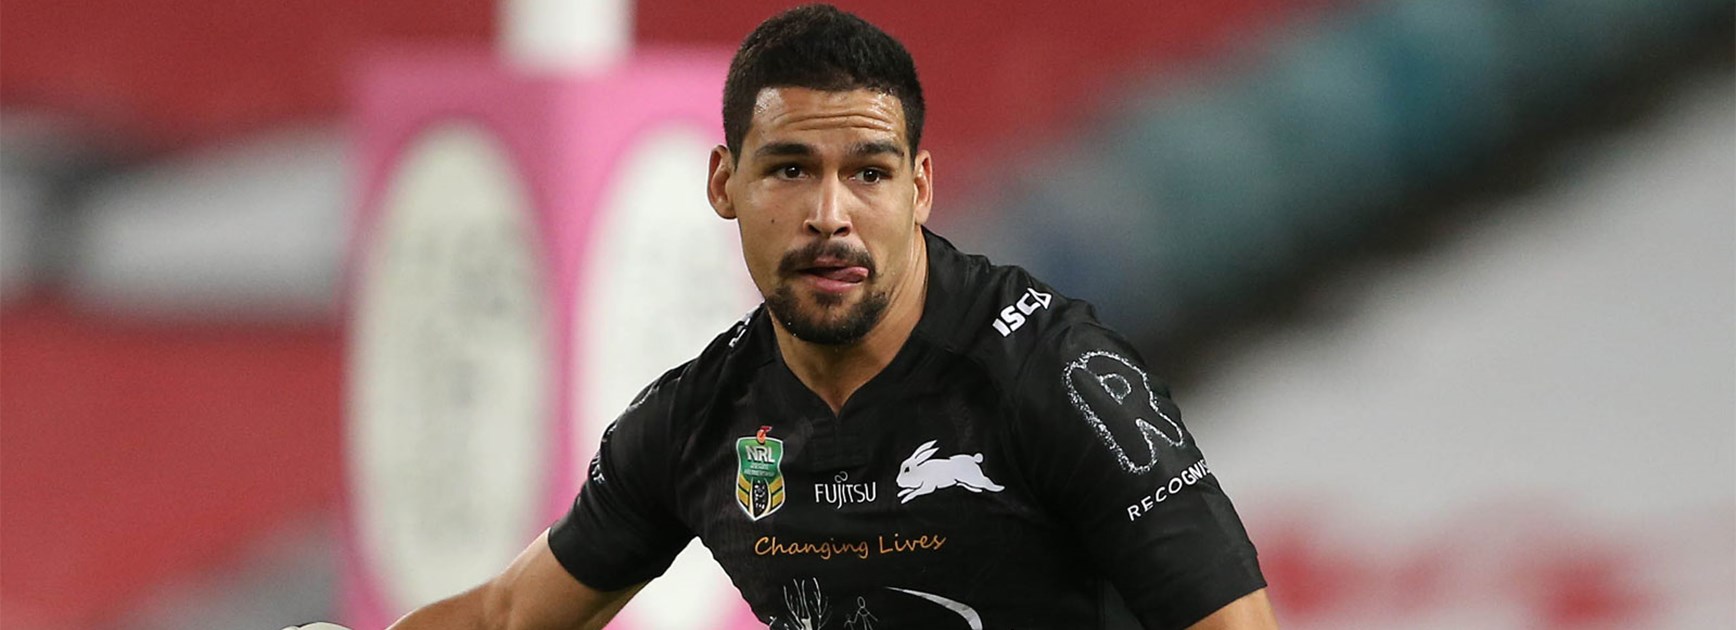 Cody Walker impressed in his first stint at fullback for the Rabbitohs in Round 11.